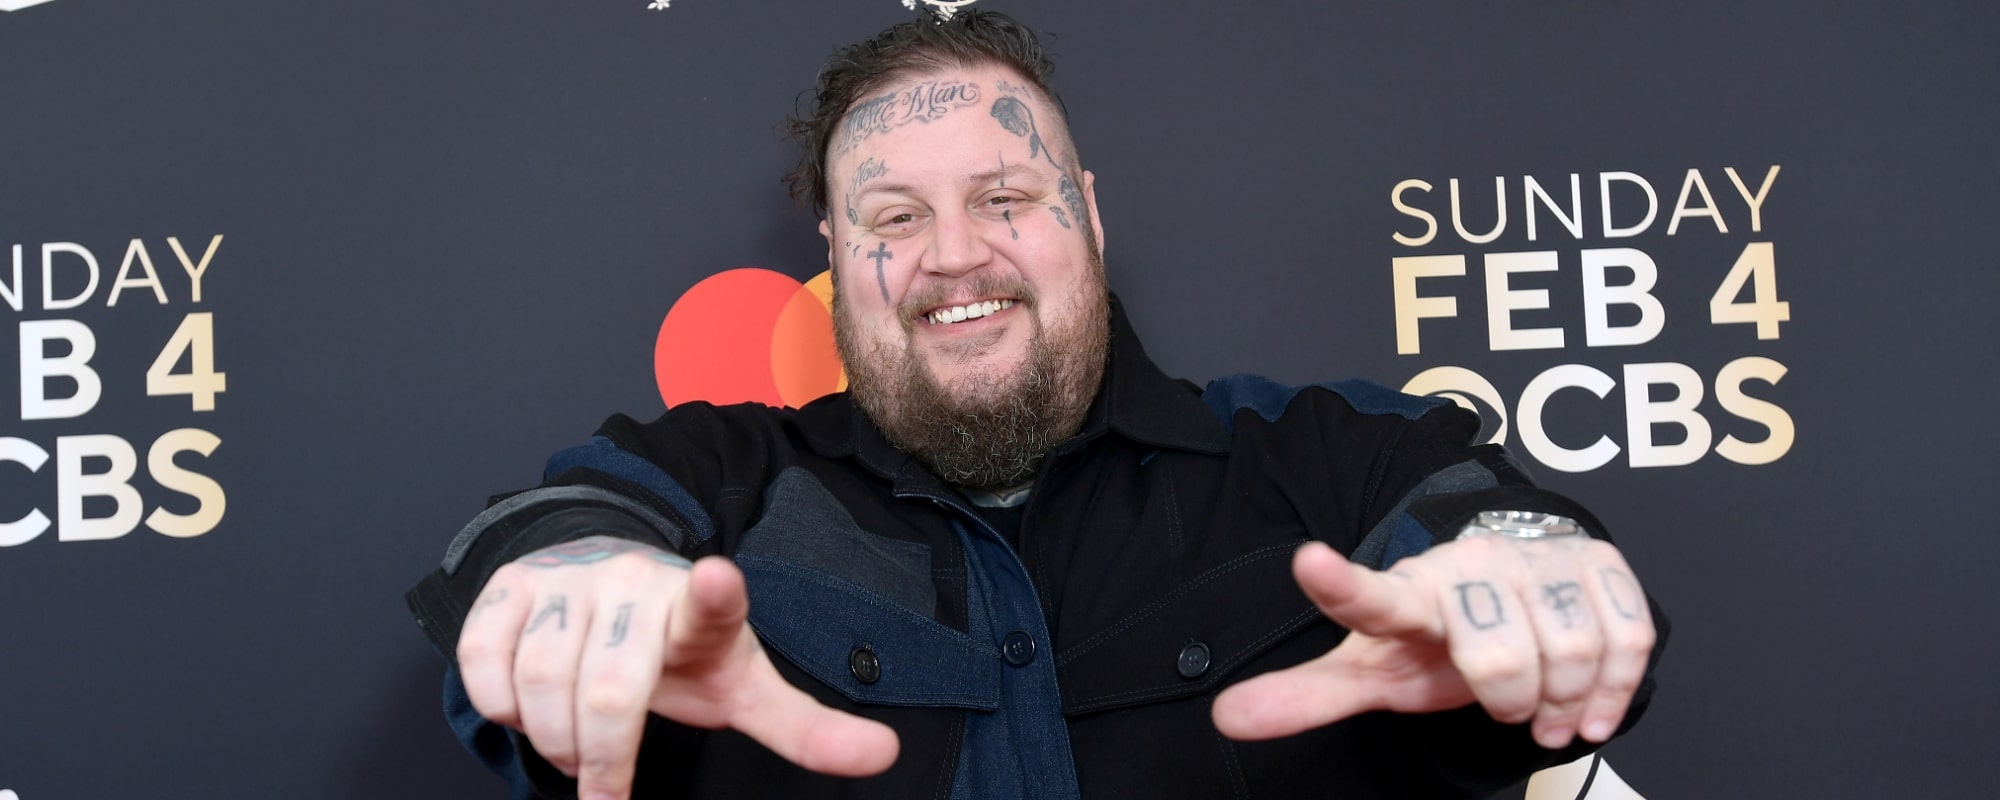 Jelly Roll Shares Important Advice for Those Thinking About Getting Tattooed